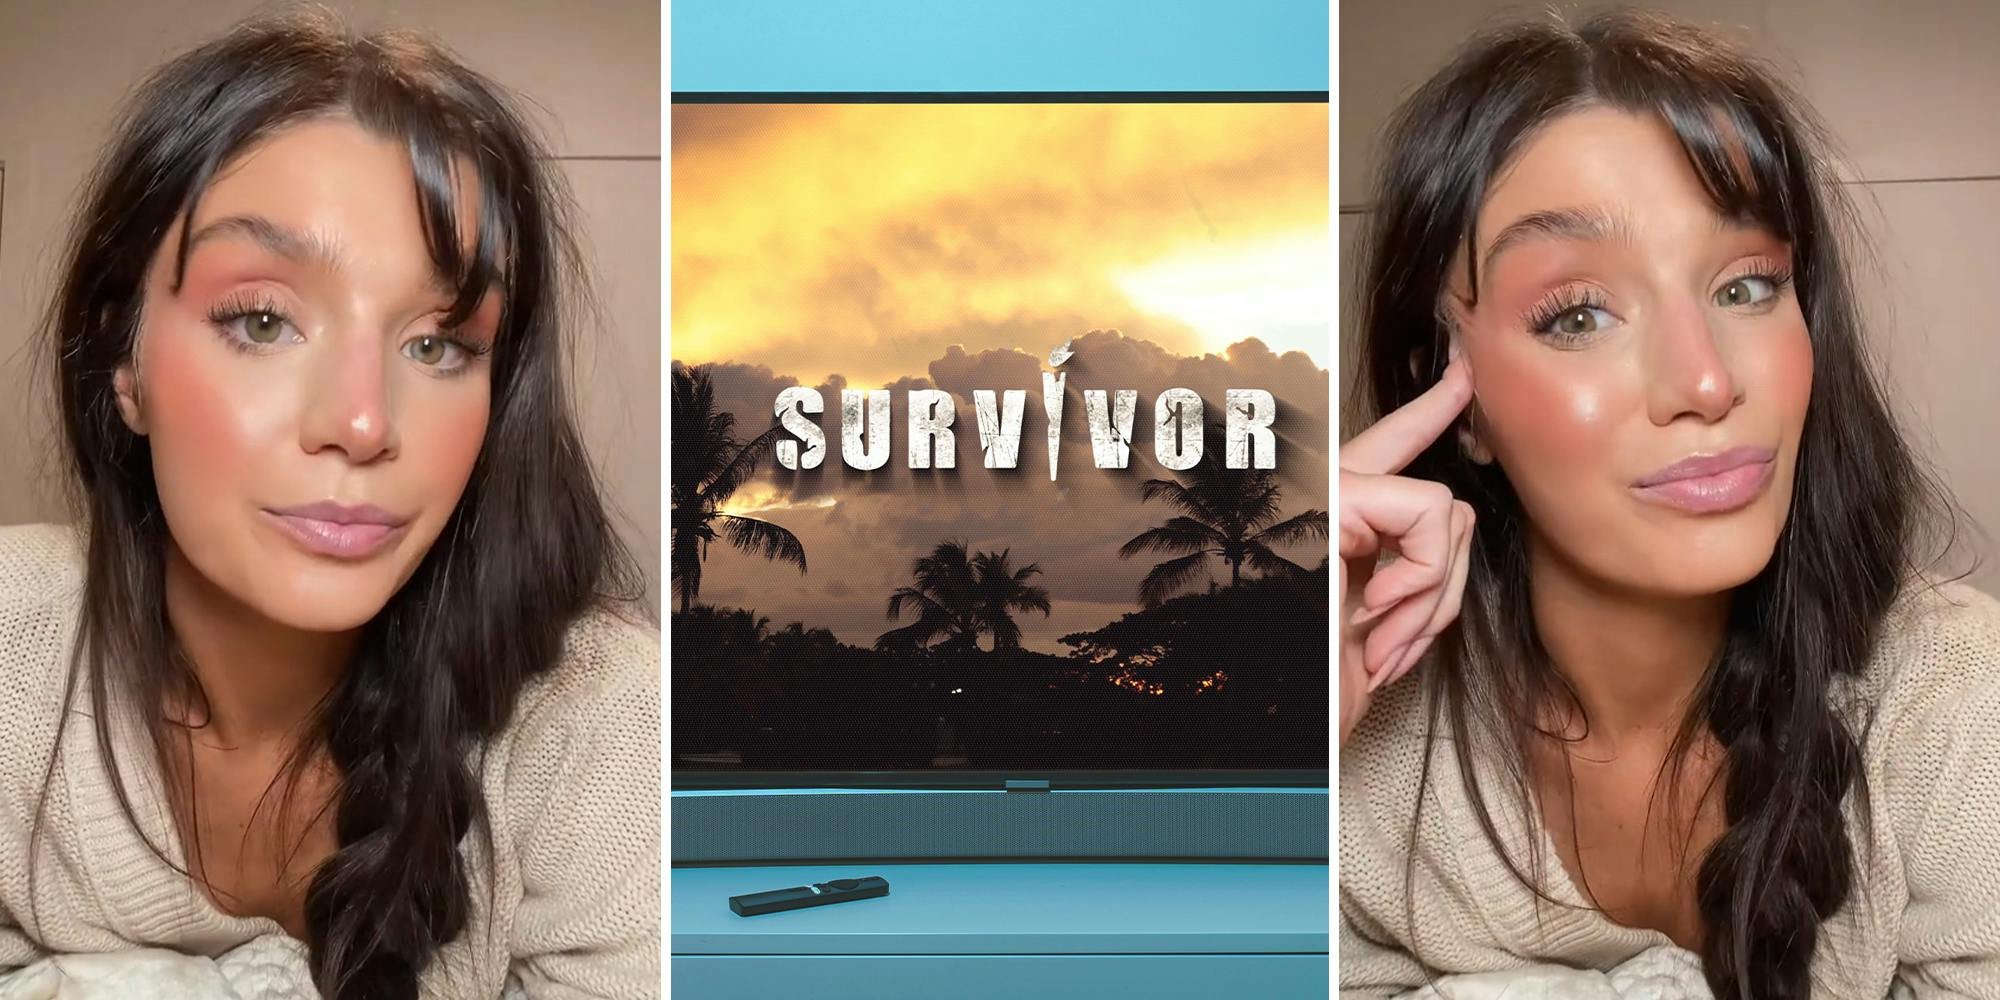 Man says ‘Survivor’ contestants secretly got granola bars and show was fake. He didn’t know he was talking to an expert